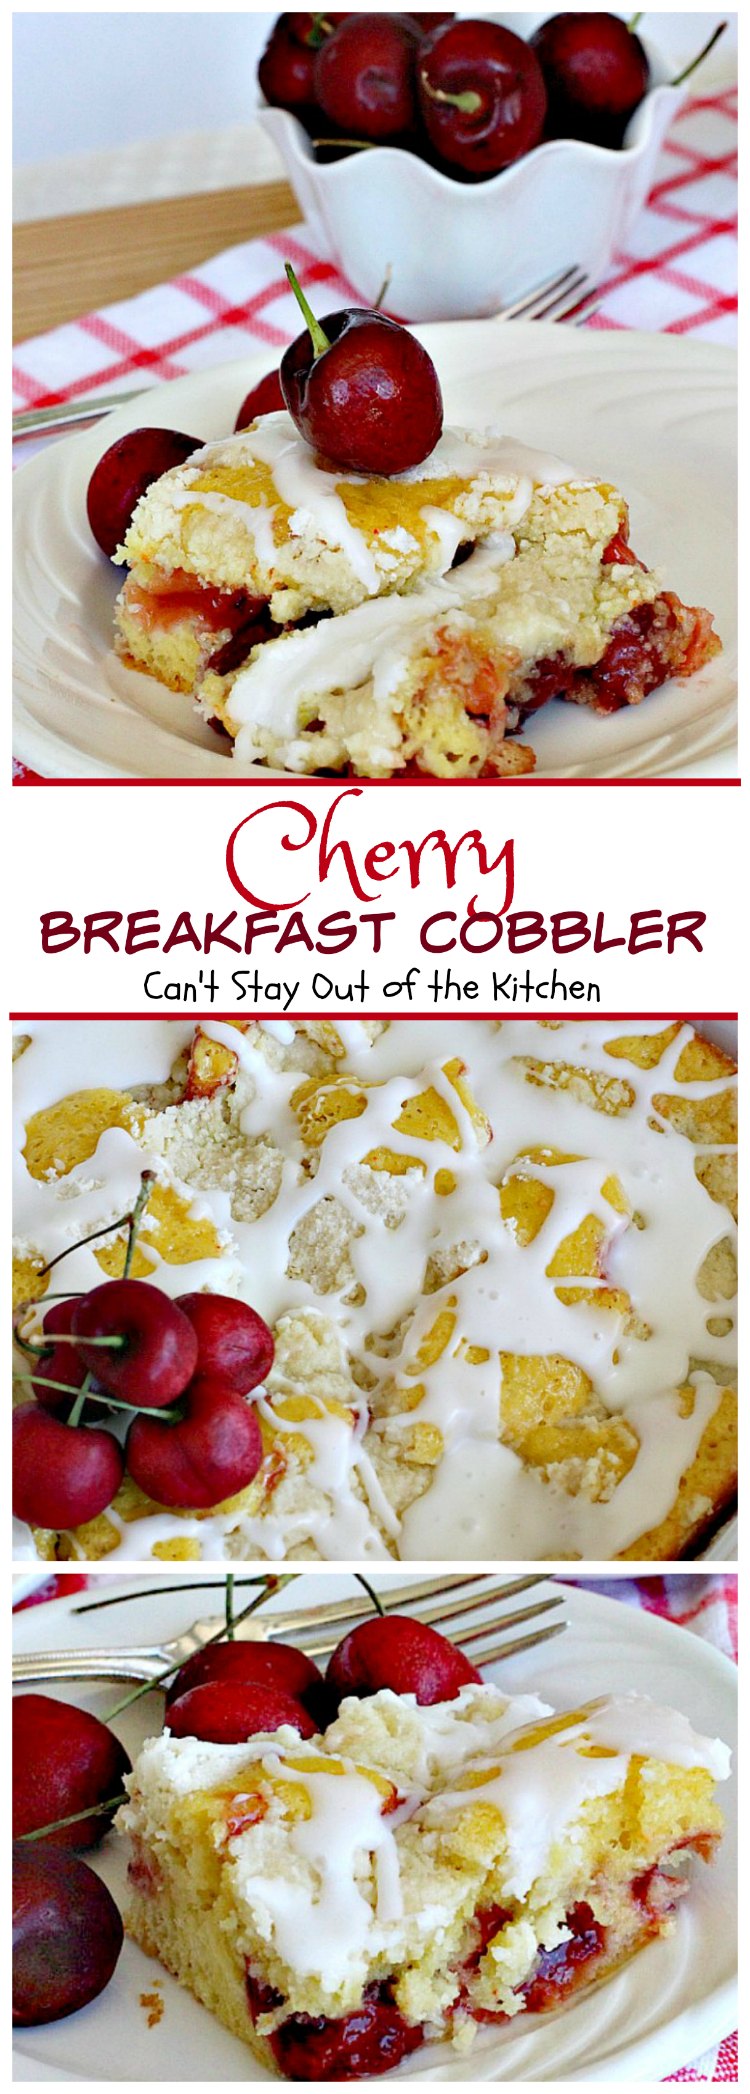 Cherry Breakfast Cobbler | Can't Stay Out of the Kitchen